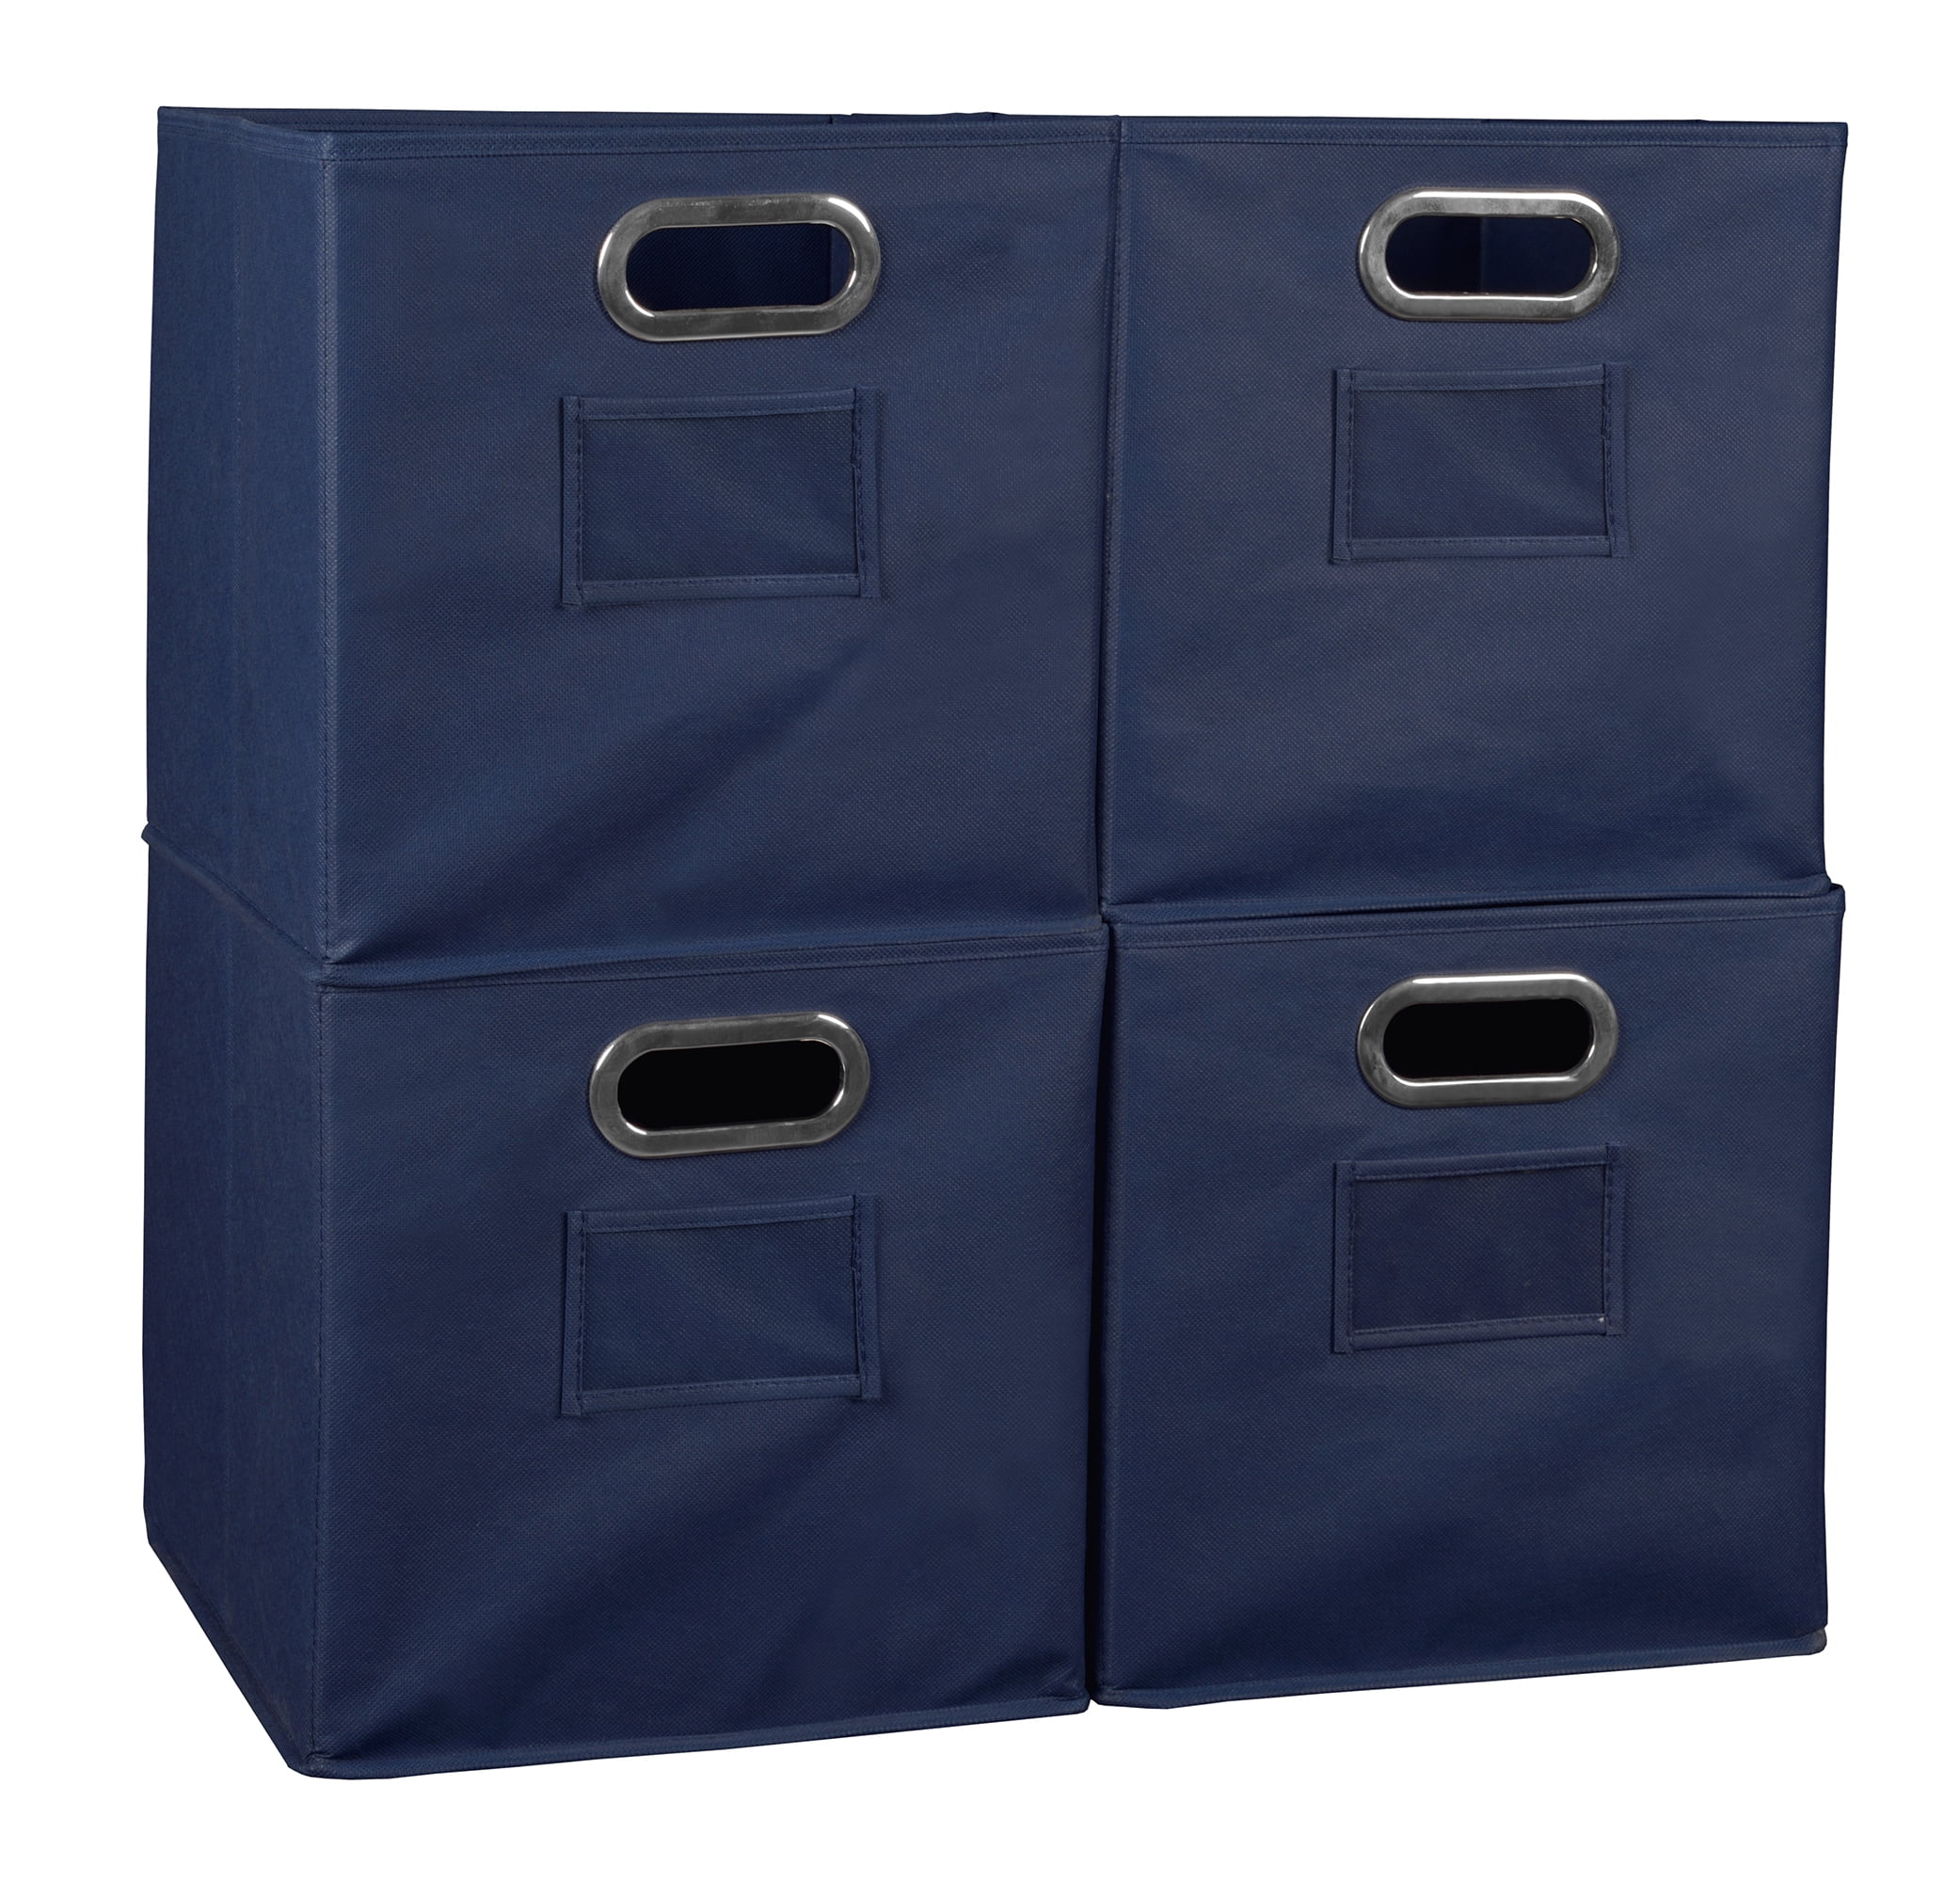 Collapsible Home Storage Set of 4 Foldable Fabric Storage Bins- Blue ...